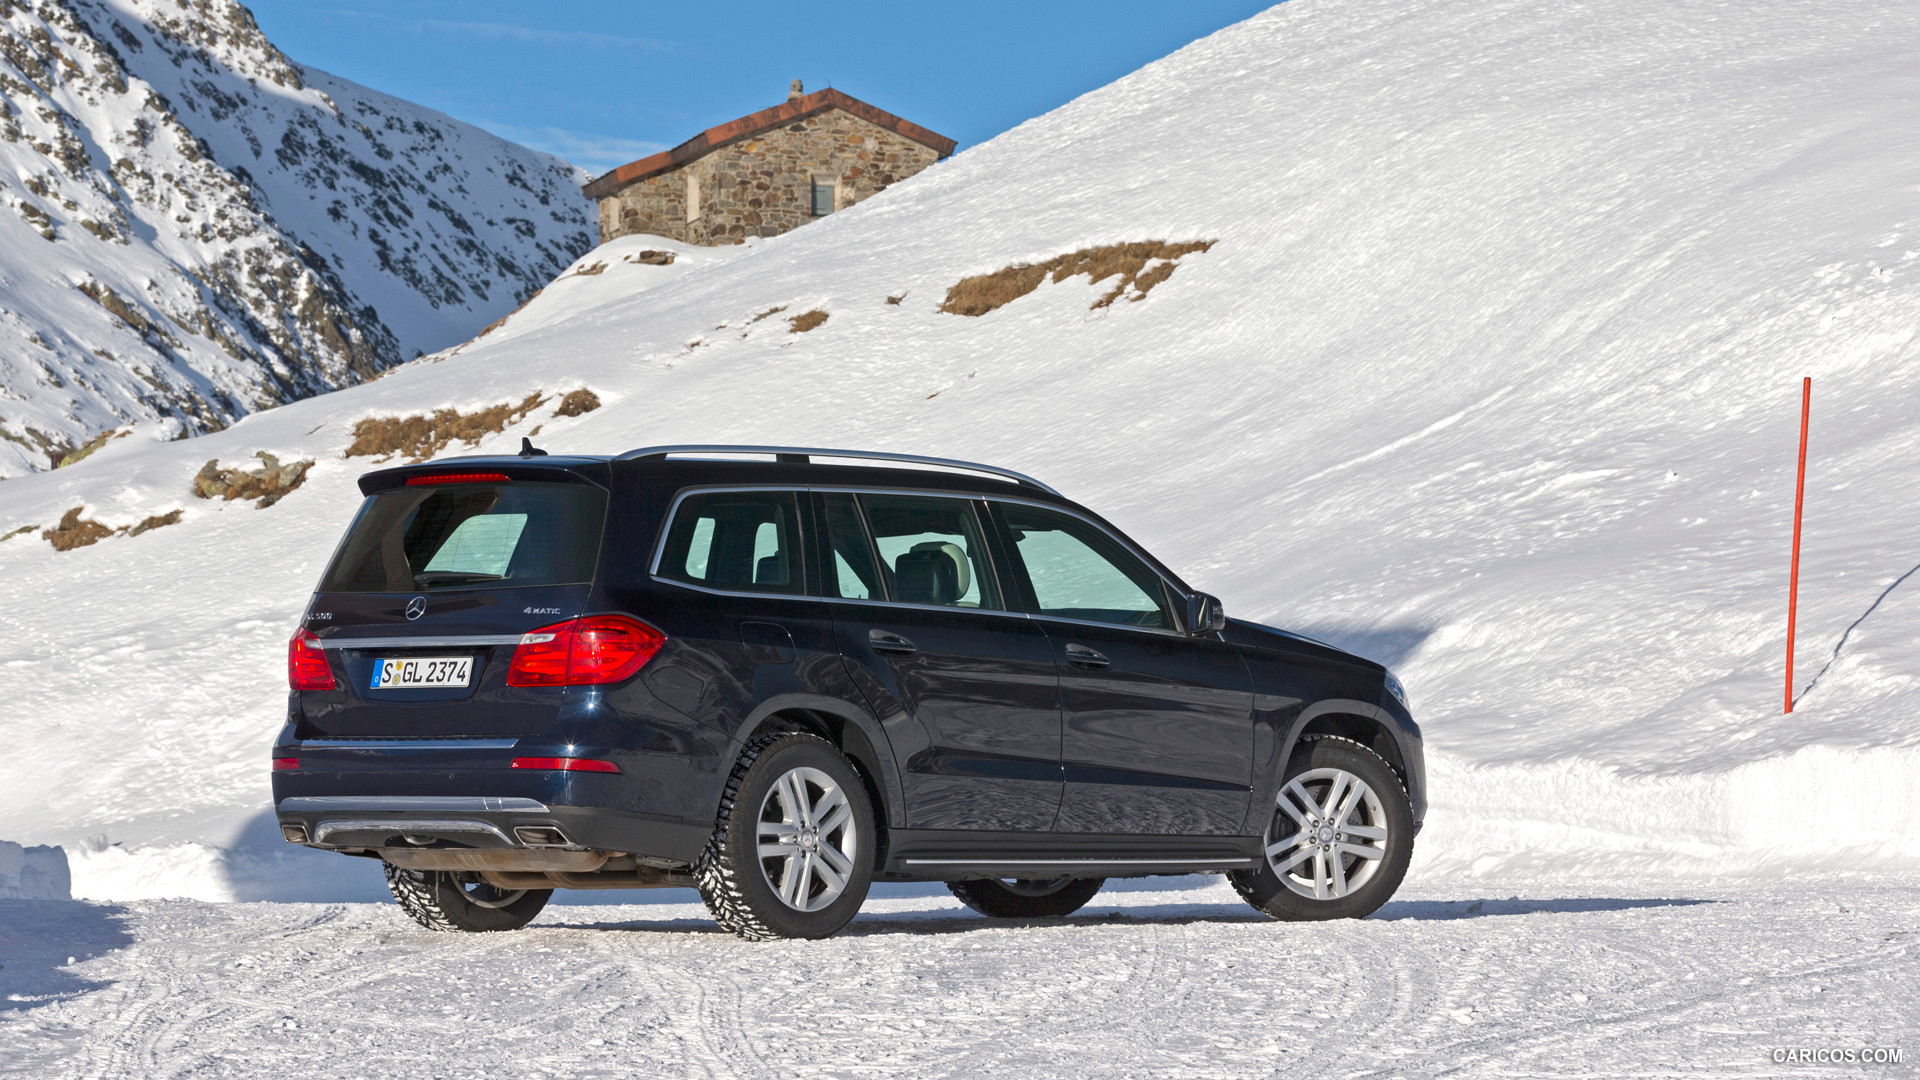 2013 Mercedes-Benz GL 500 4MATIC on Snow - Rear, #232 of 259